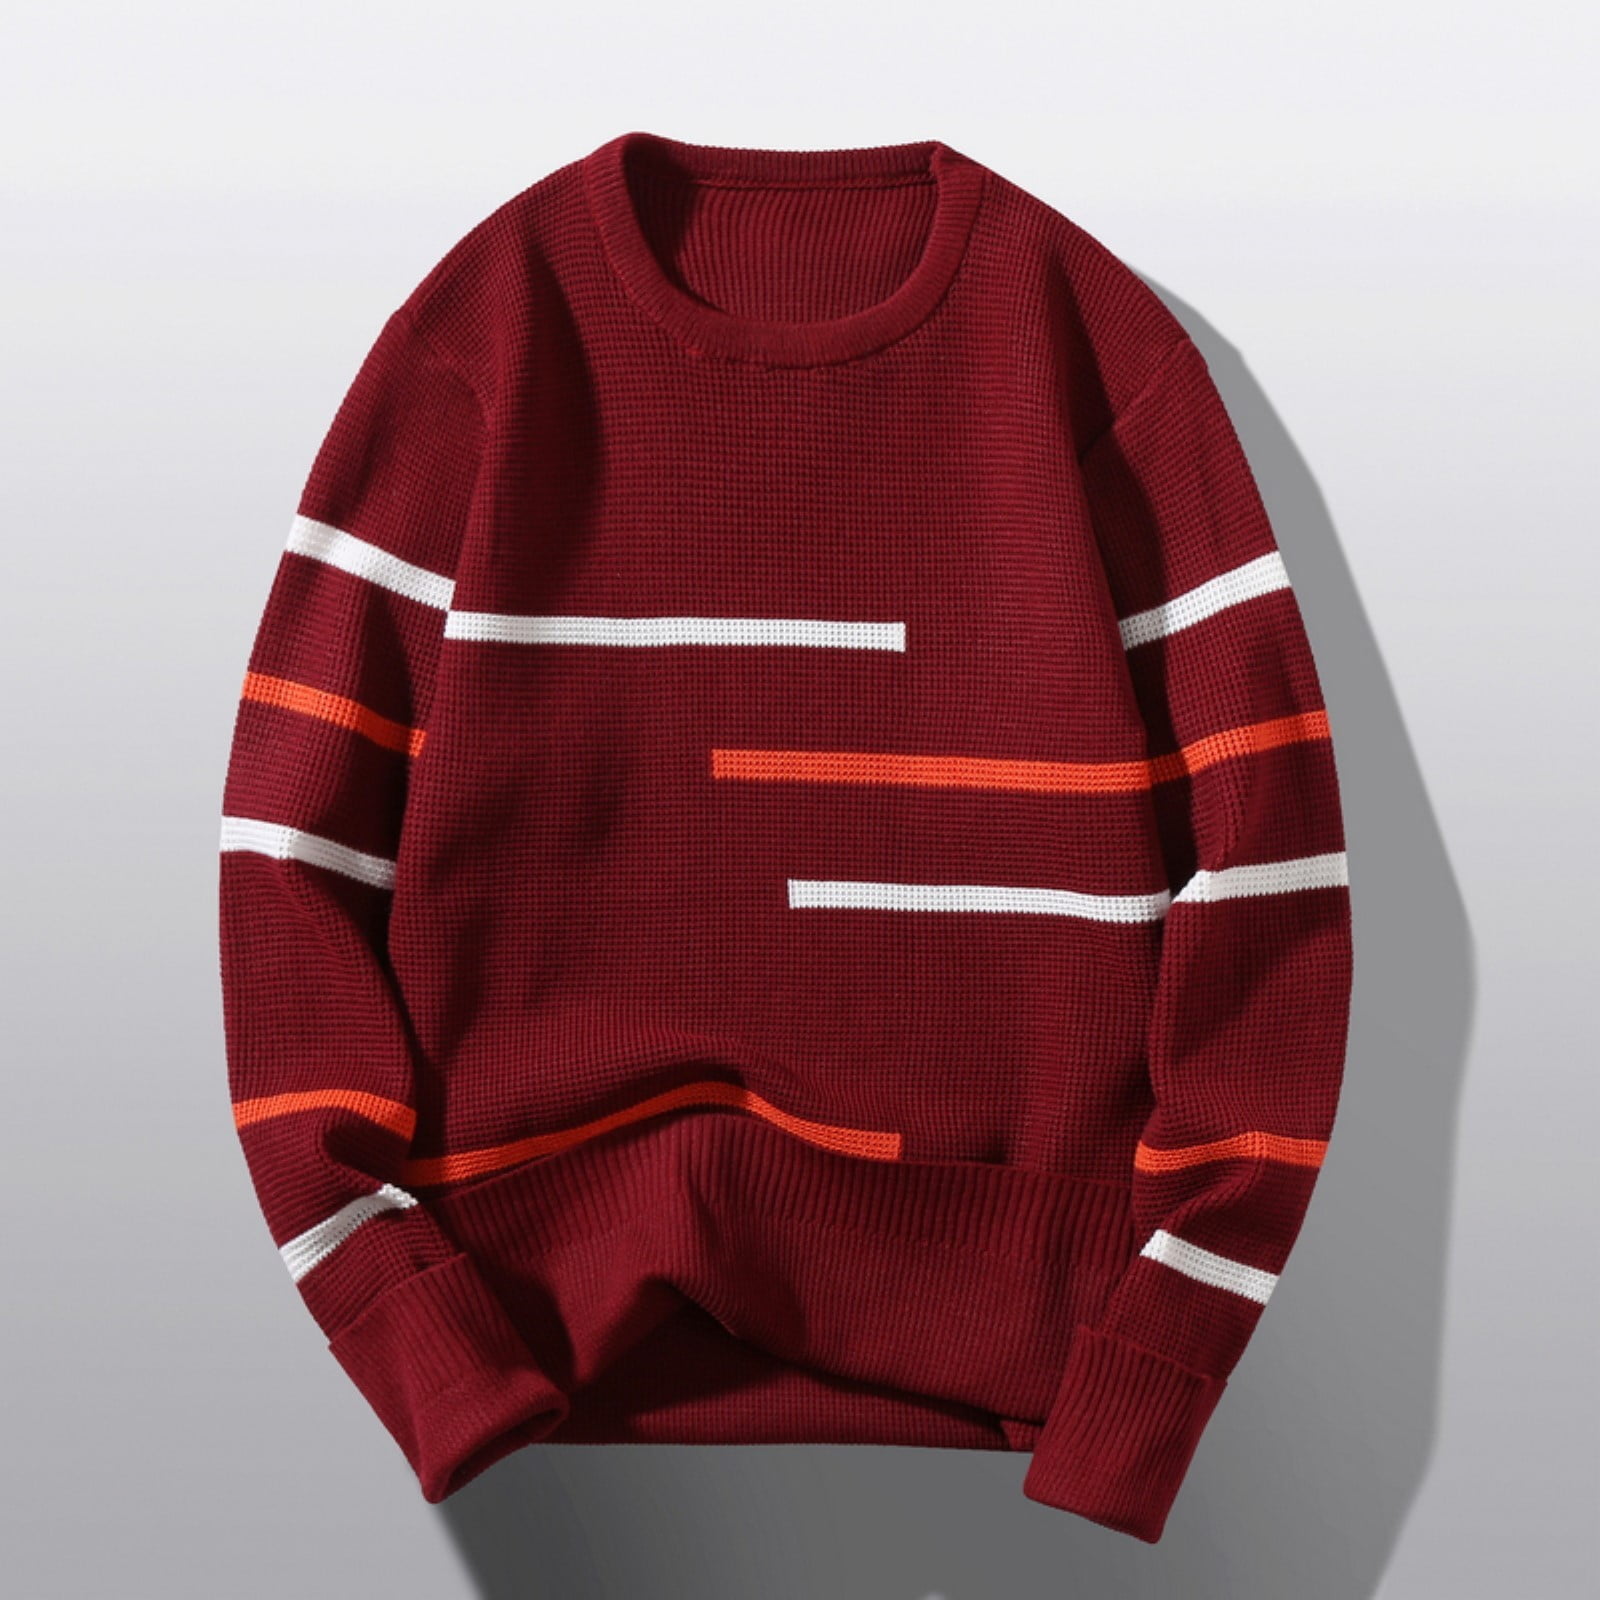 UIX Male Autumn and Winter Wool Sweater Round Neck Pullover Bottoming ...